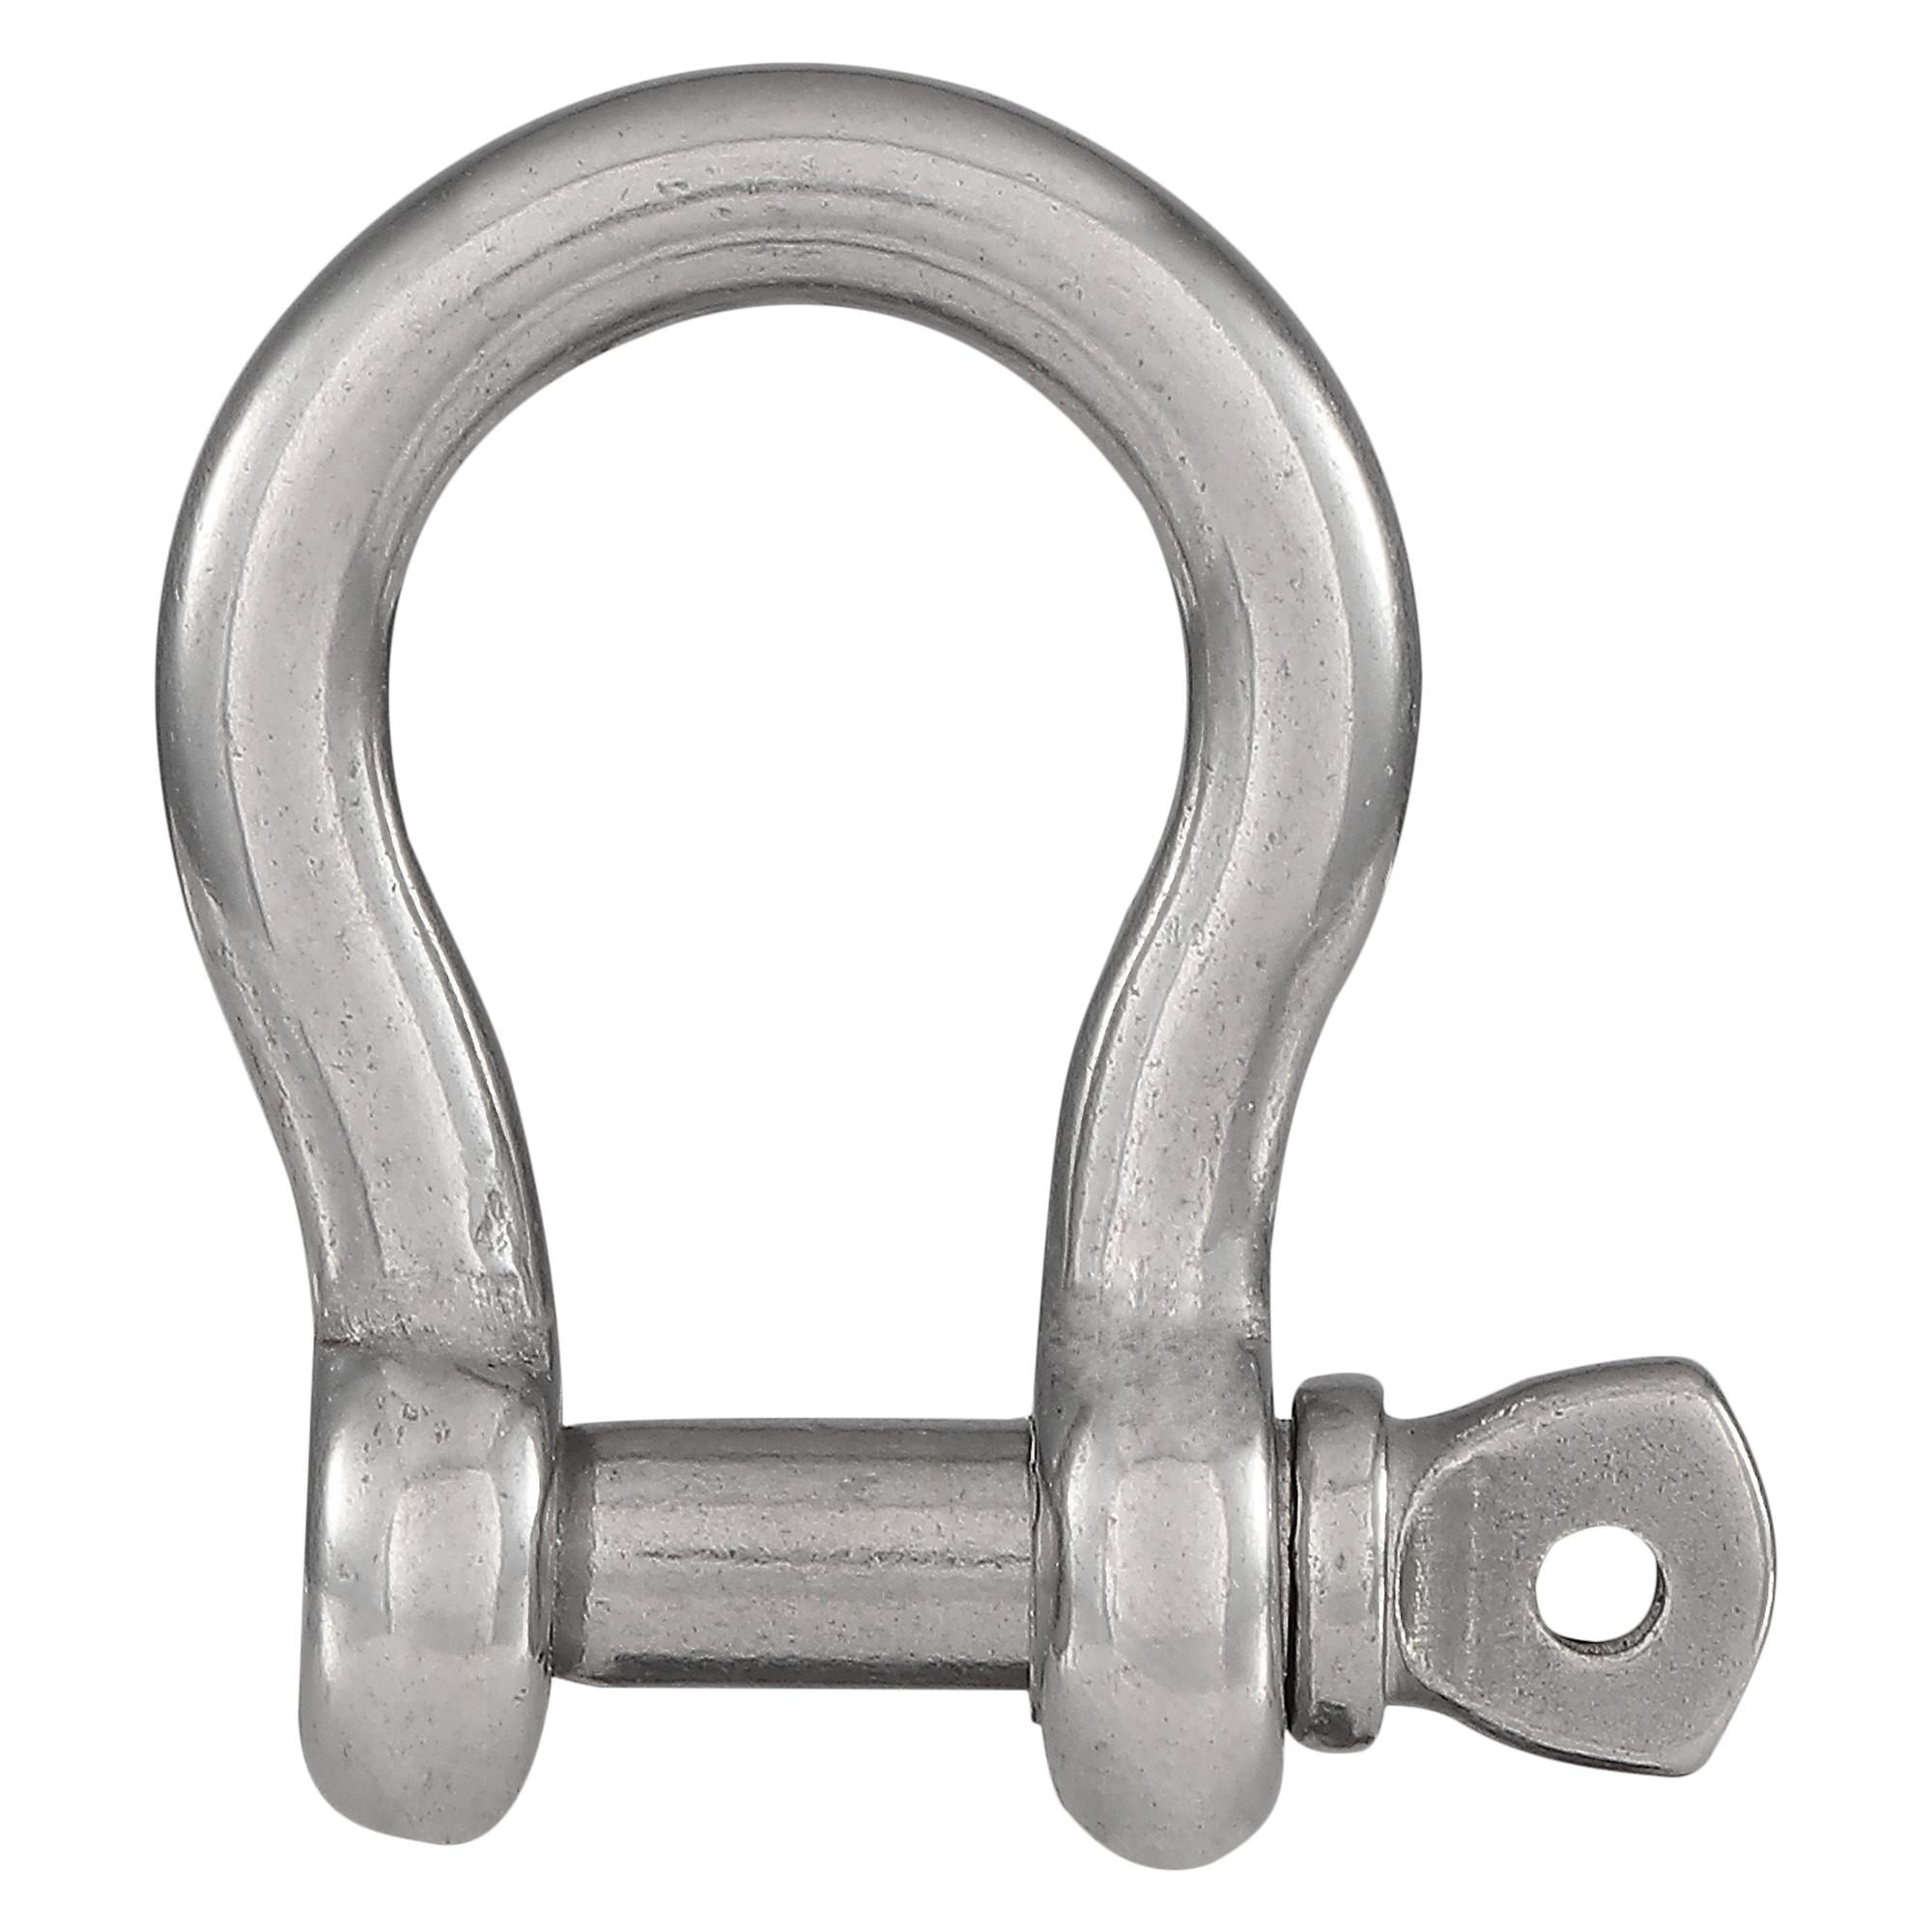 N100-347 Anchor Shackle, 3/16 in Trade, 650 lb Working Load, 3/16 in Dia Wire, 316 Grade